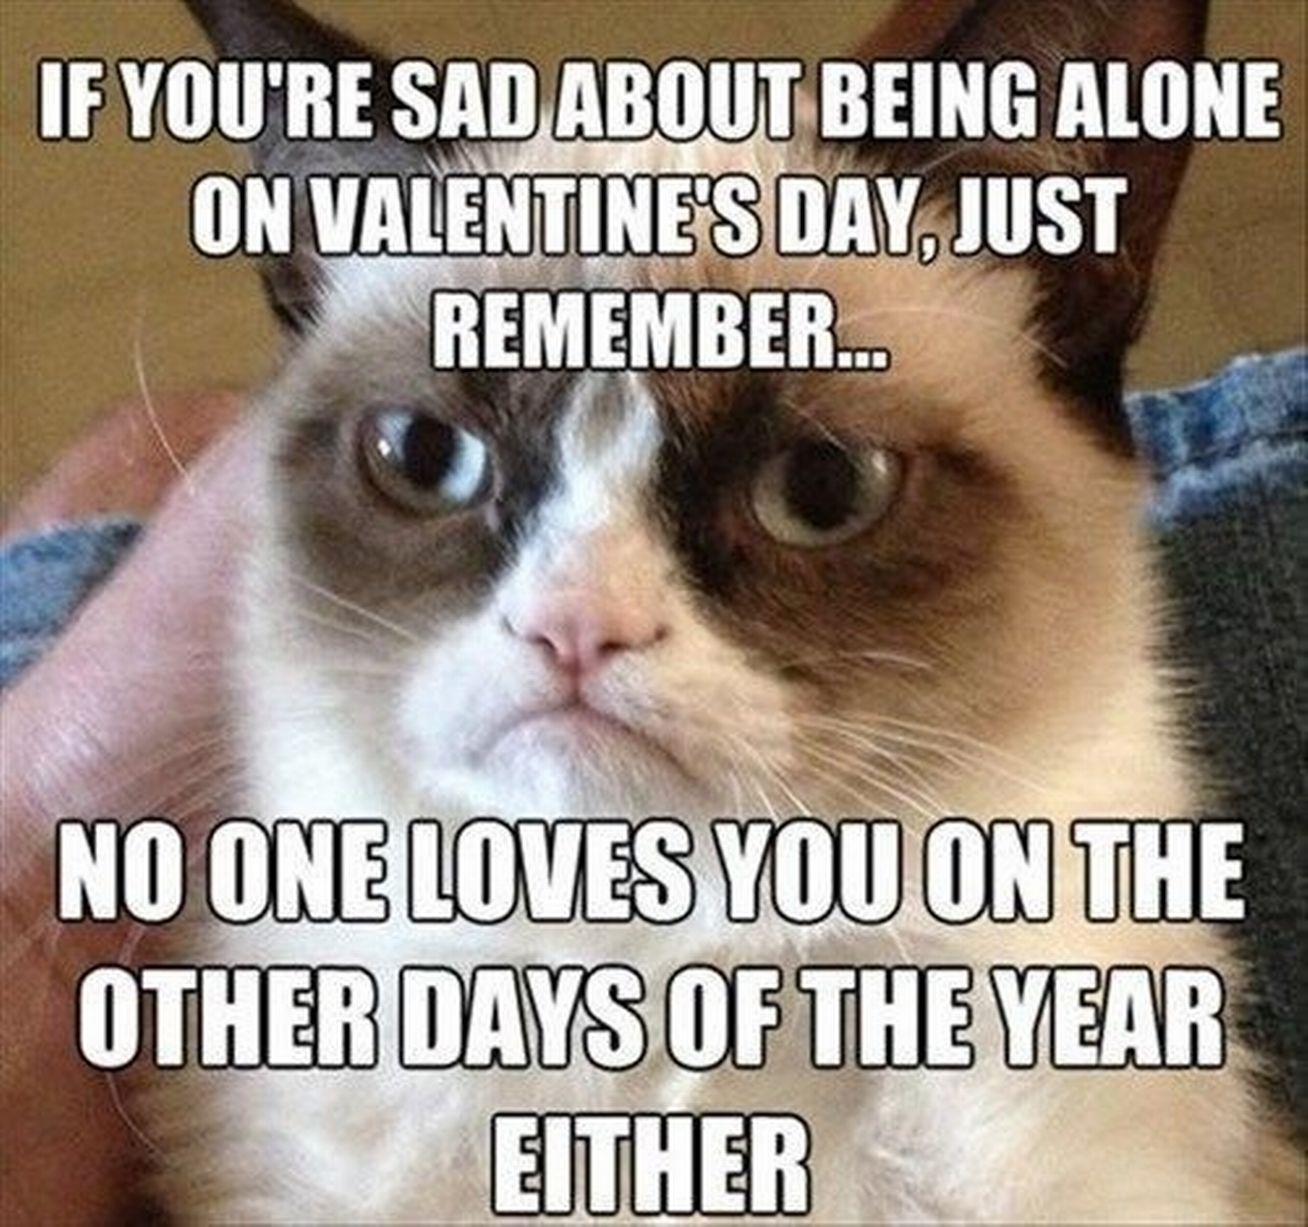 Meme About valentines That Will Make You Laugh valentine's day memes for singles